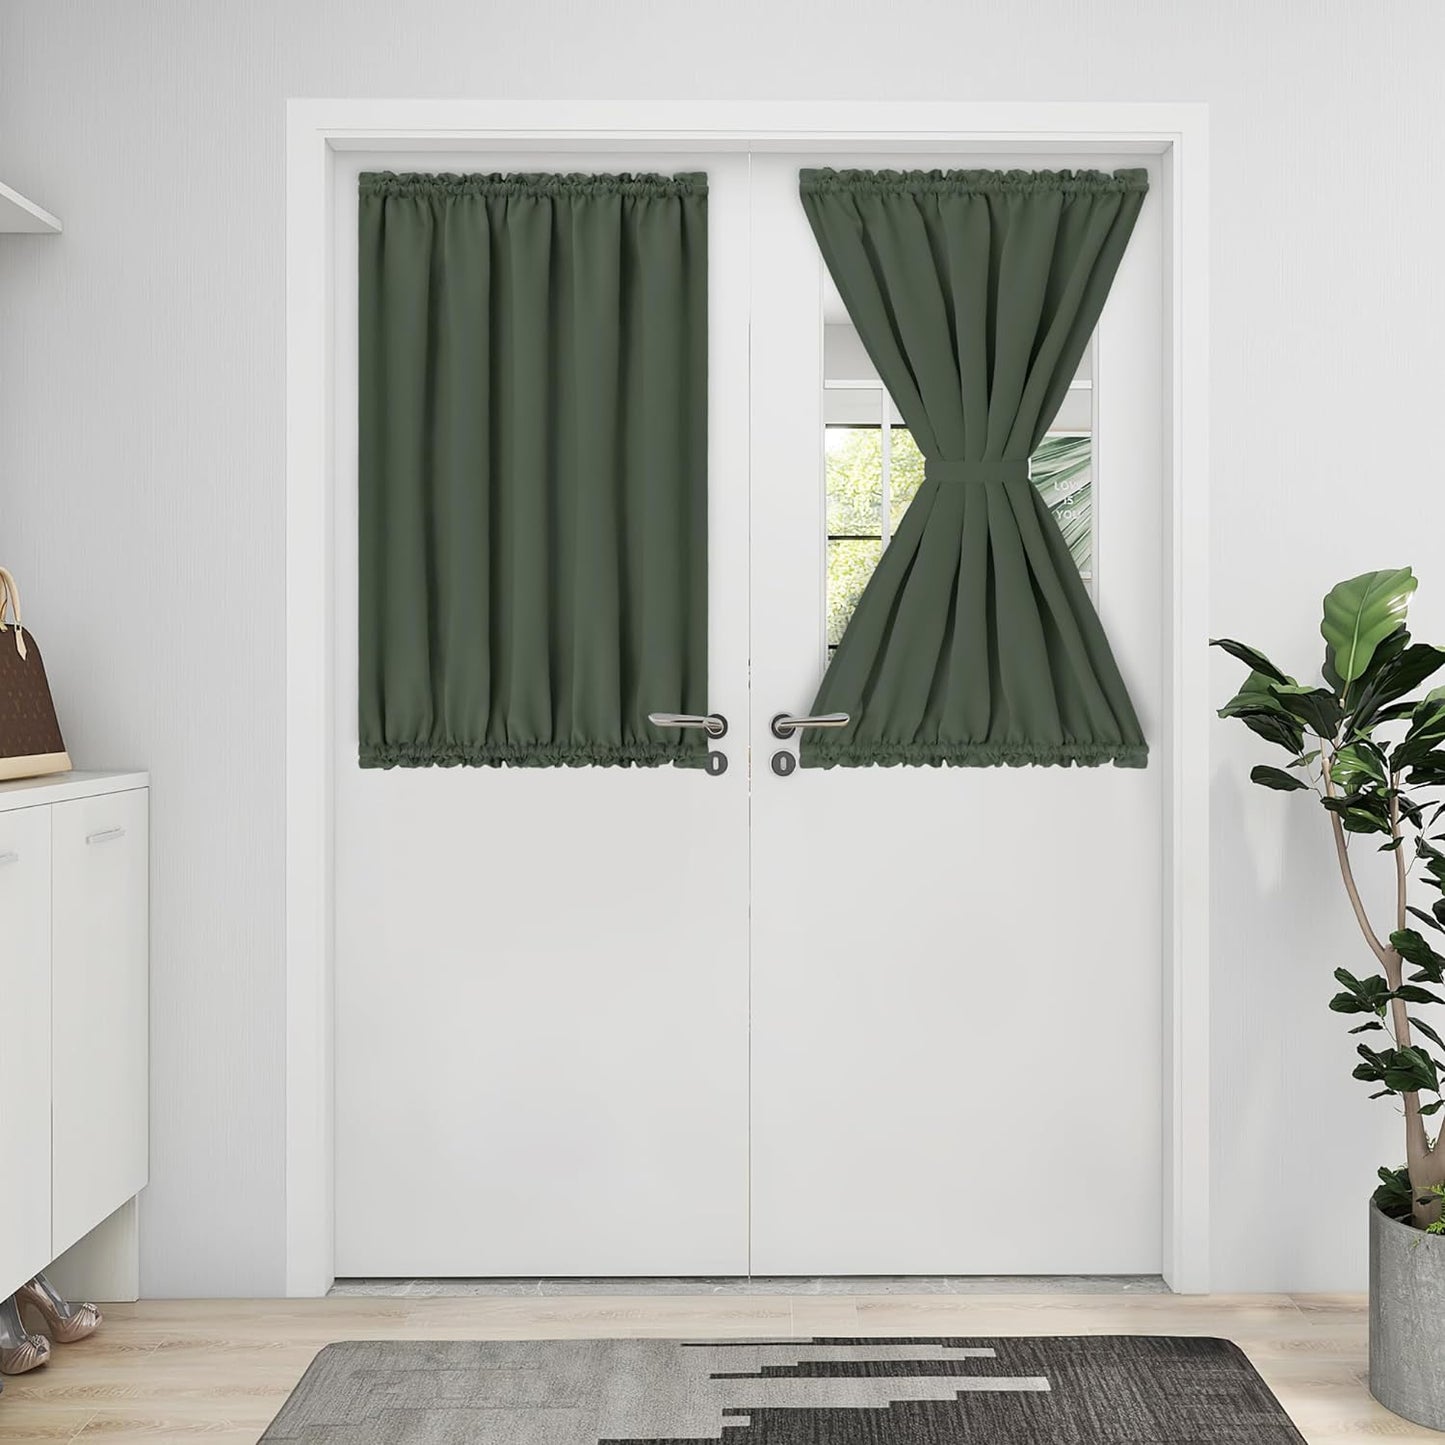 Easy-Going Blackout Door Curtains, Rod Pocket Privacy Light Filtering Sidelight Curtains French Door Curtains with Tieback, 1 Panel, 25X40 Inch, Gray  Easy-Going Greyish Green W25 X L40 Inch 